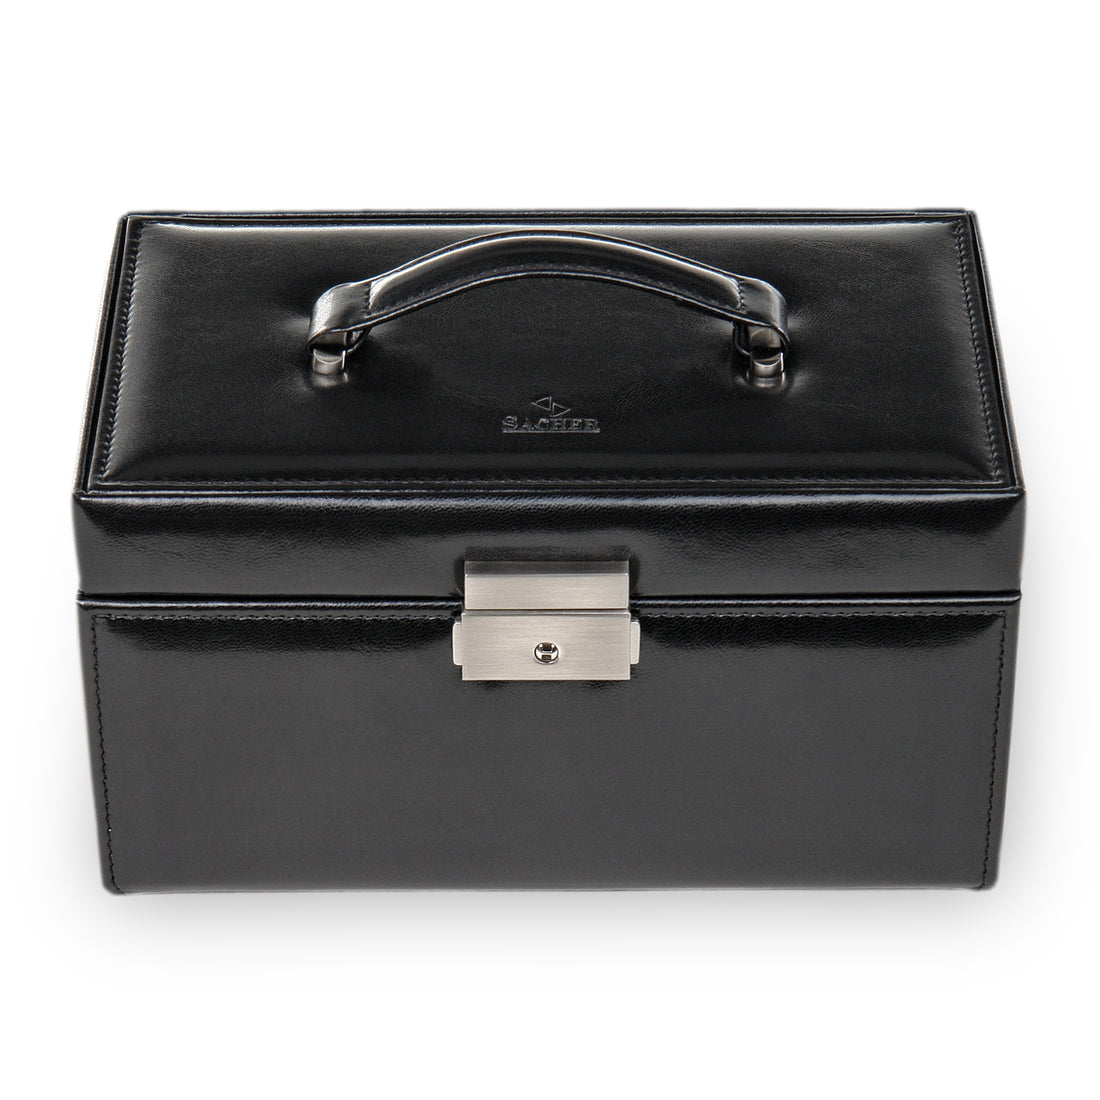 jewellery case Elly new classic / black (leather)